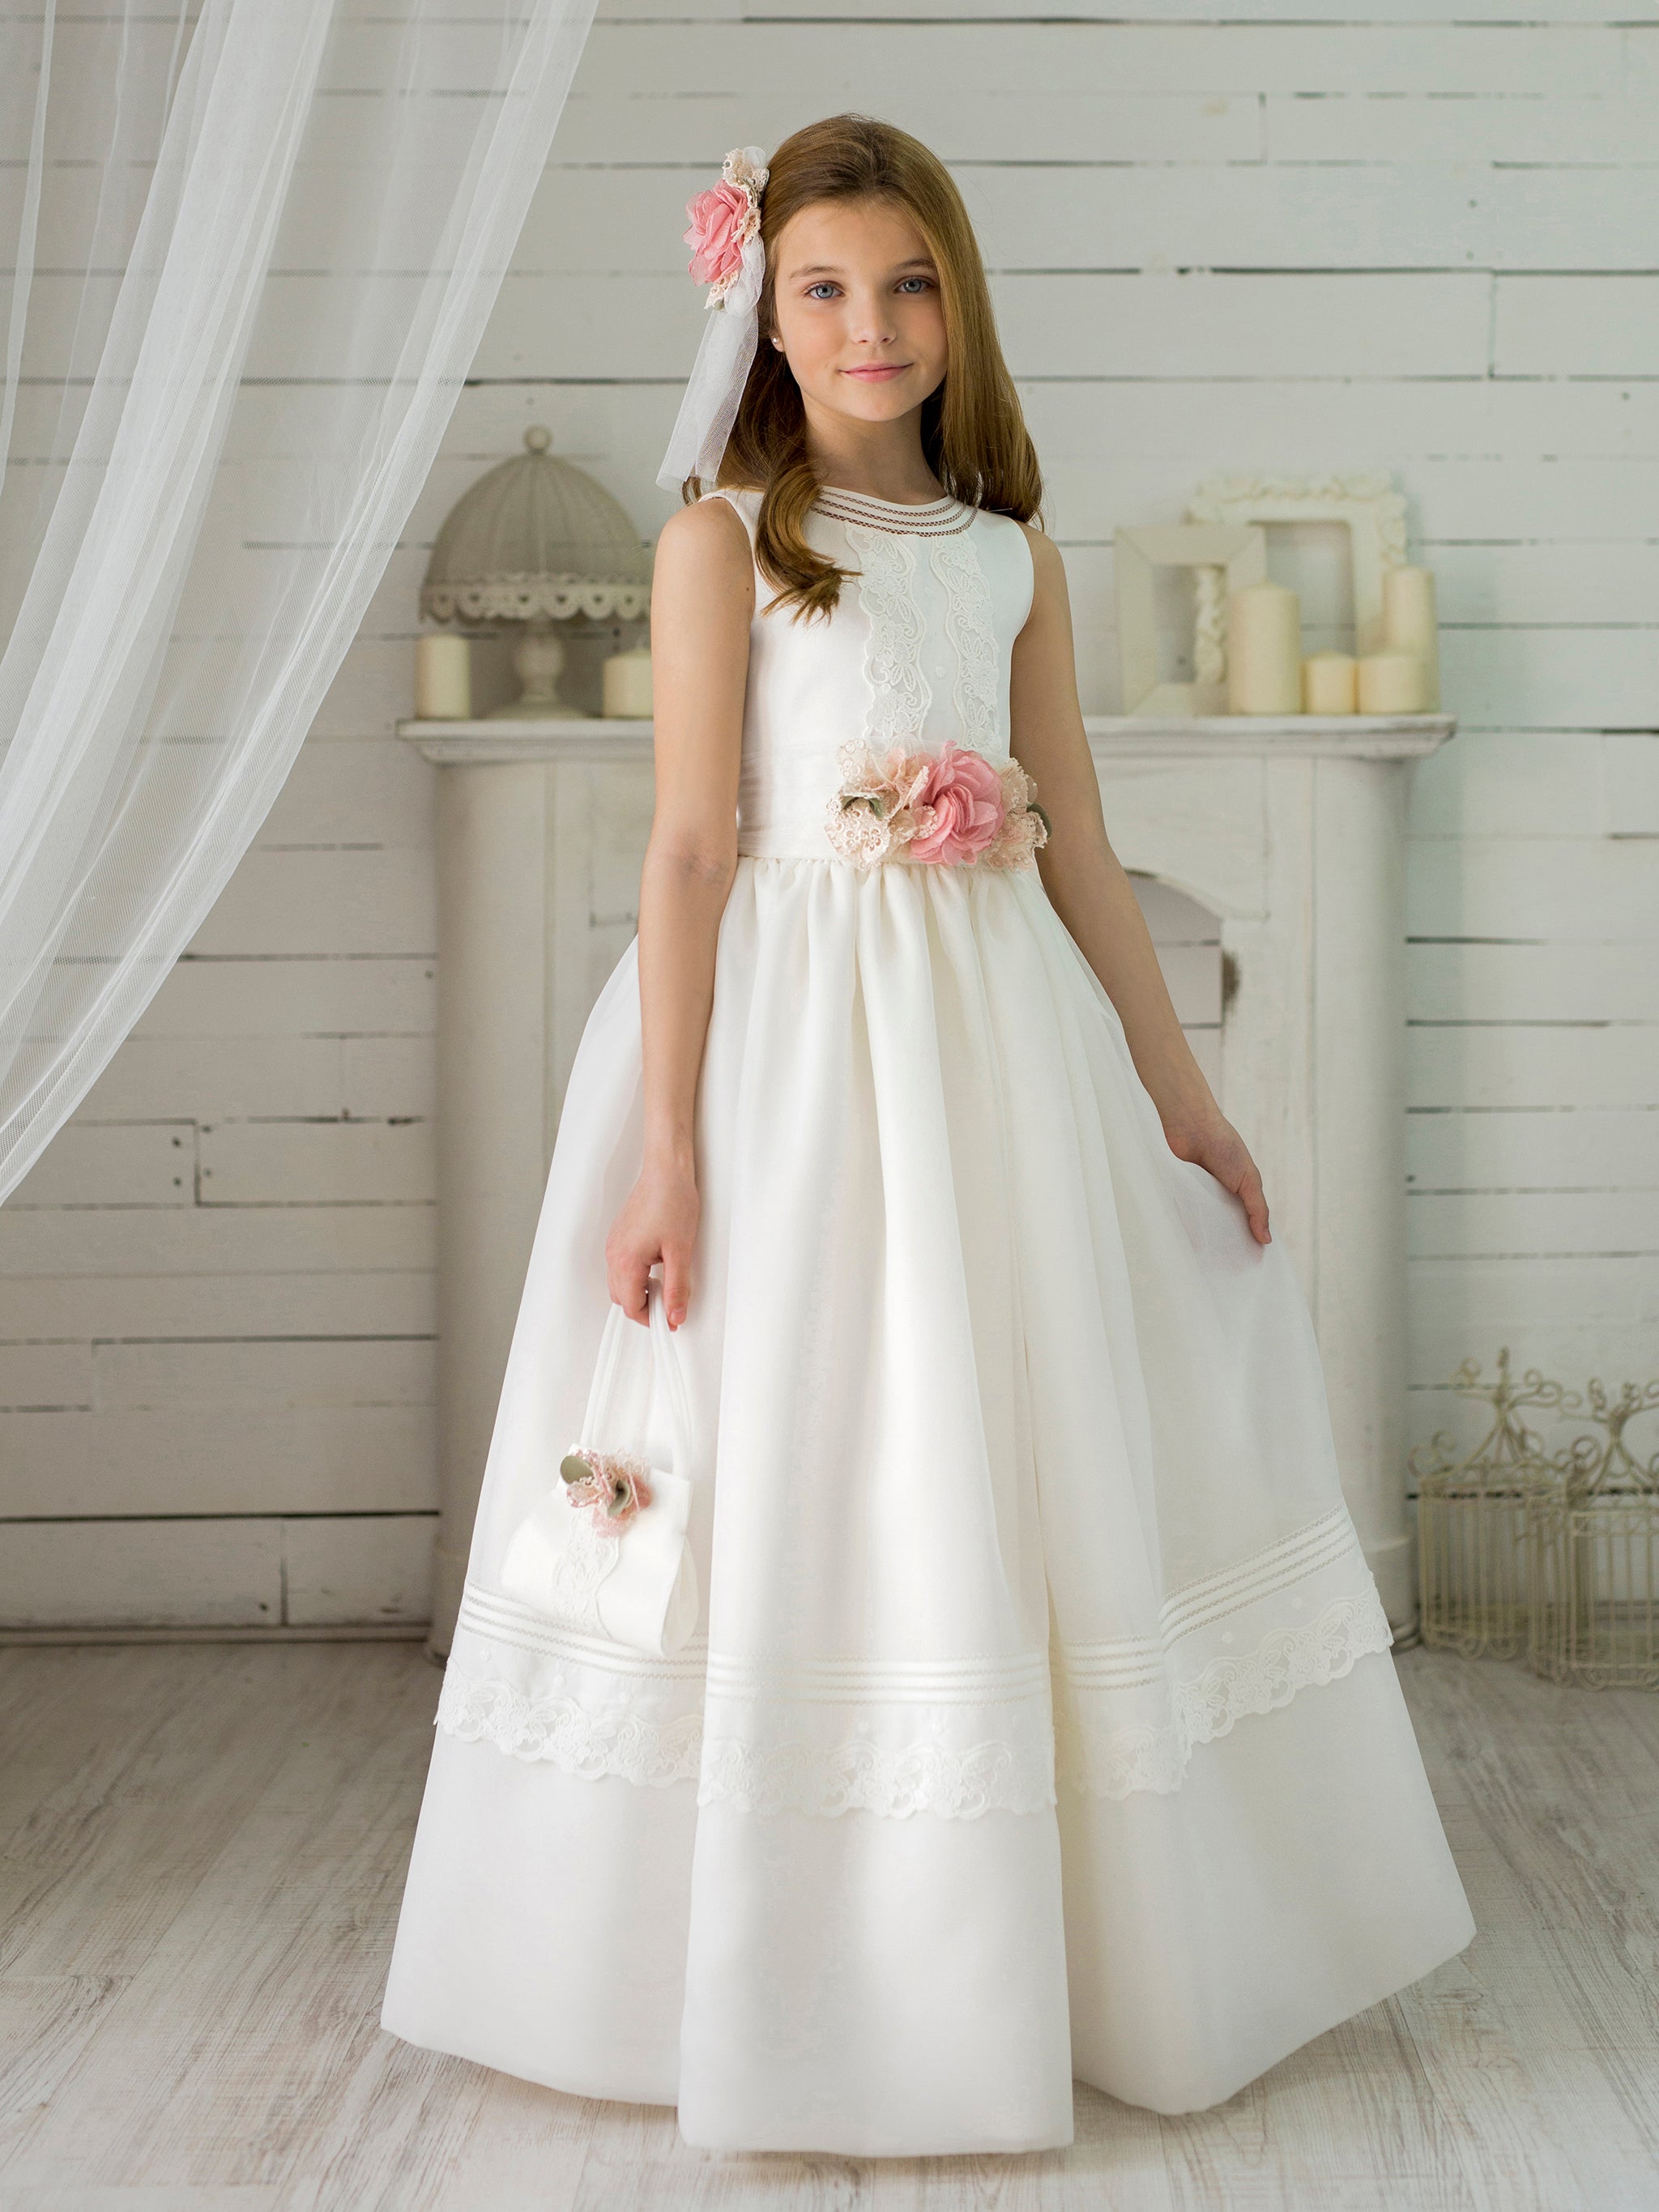 Sleeveless Fabric Spanish Communion Gown K159 Gowns